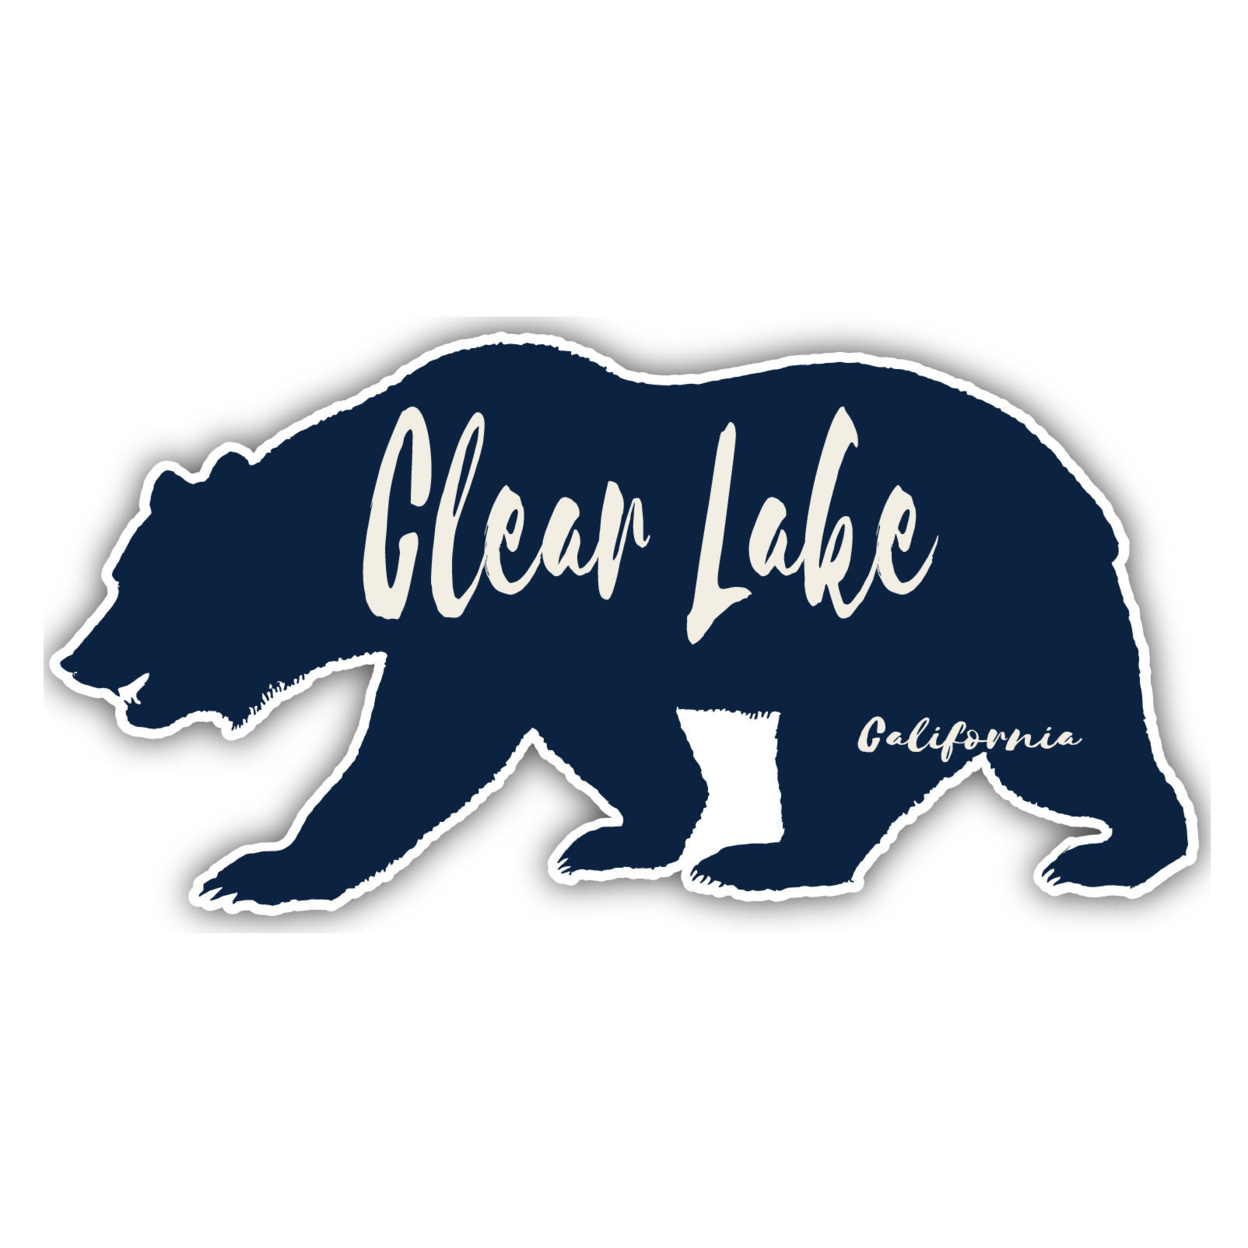 Clear Lake California Souvenir Decorative Stickers (Choose Theme And Size) - 4-Pack, 4-Inch, Bear